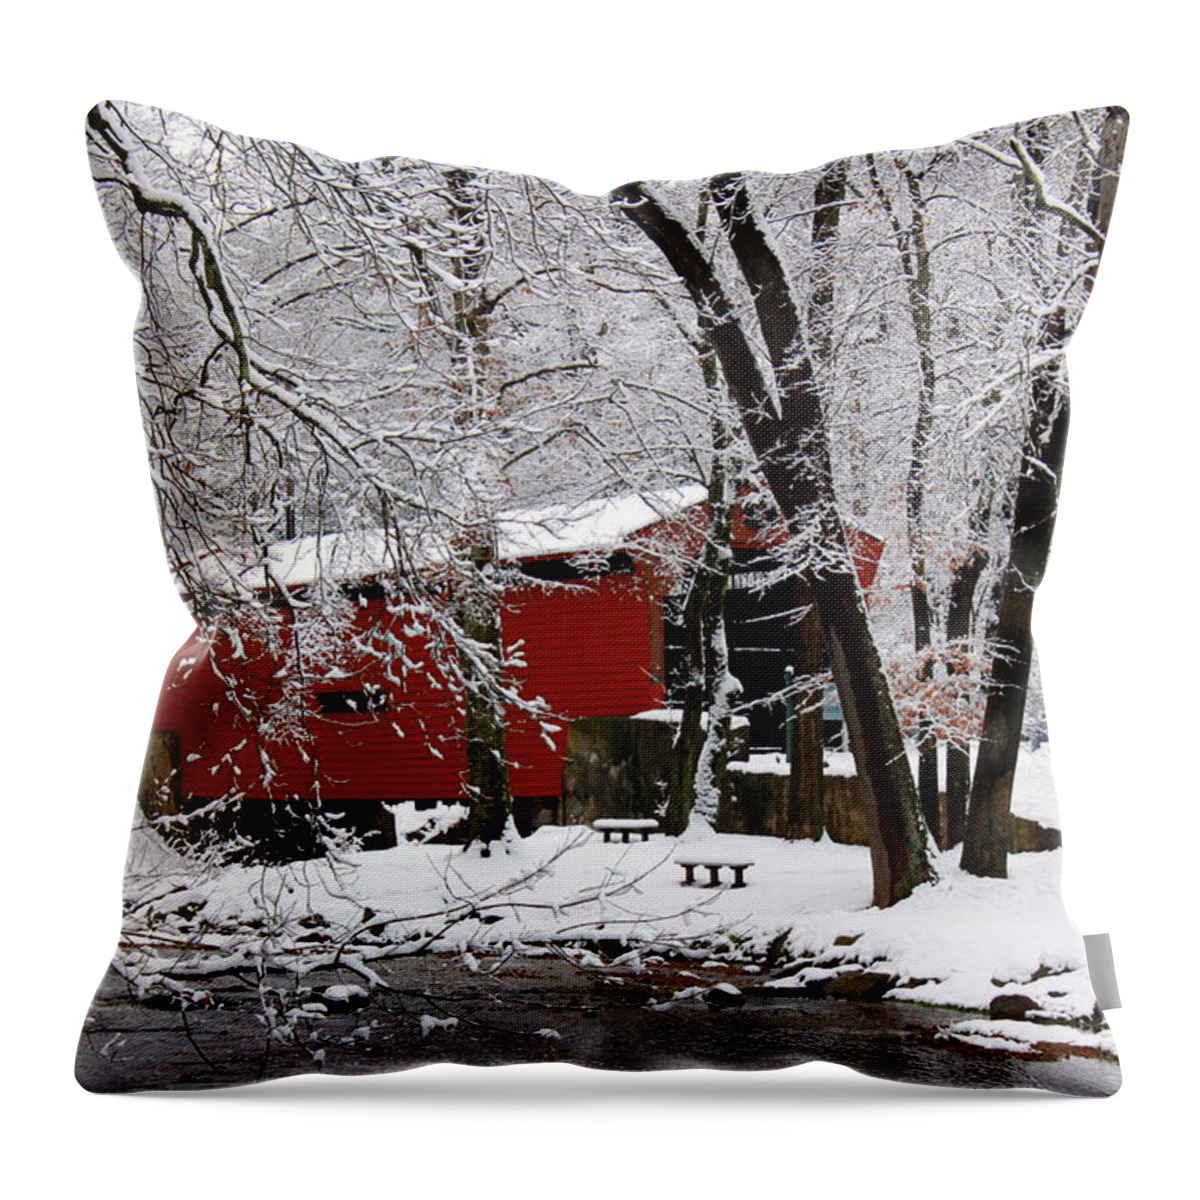 Red Covered Bridge Throw Pillow featuring the photograph Red Covered Bridge Winter 2013 by Deborah Crew-Johnson